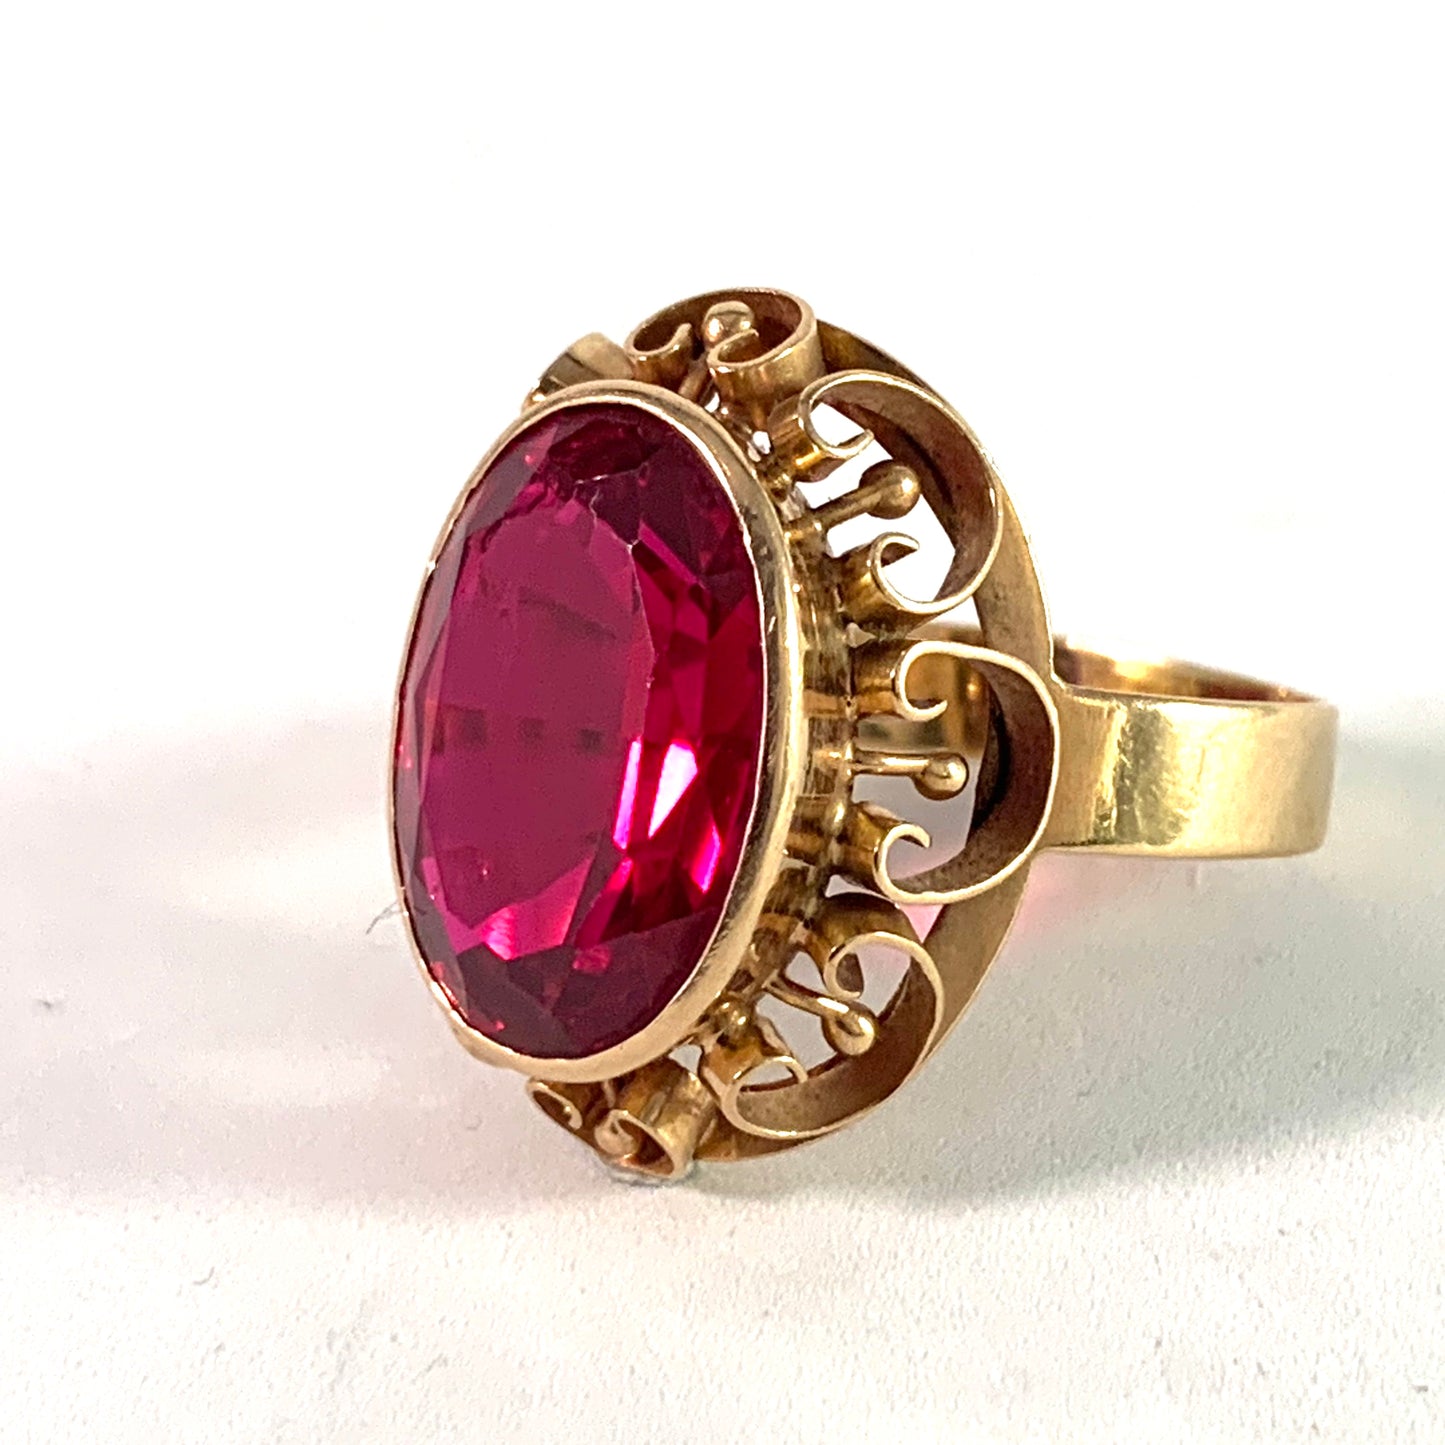 Raimo Rekola, Finland 1960s 14k Gold Large Synthetic Sapphire Cocktail Ring.